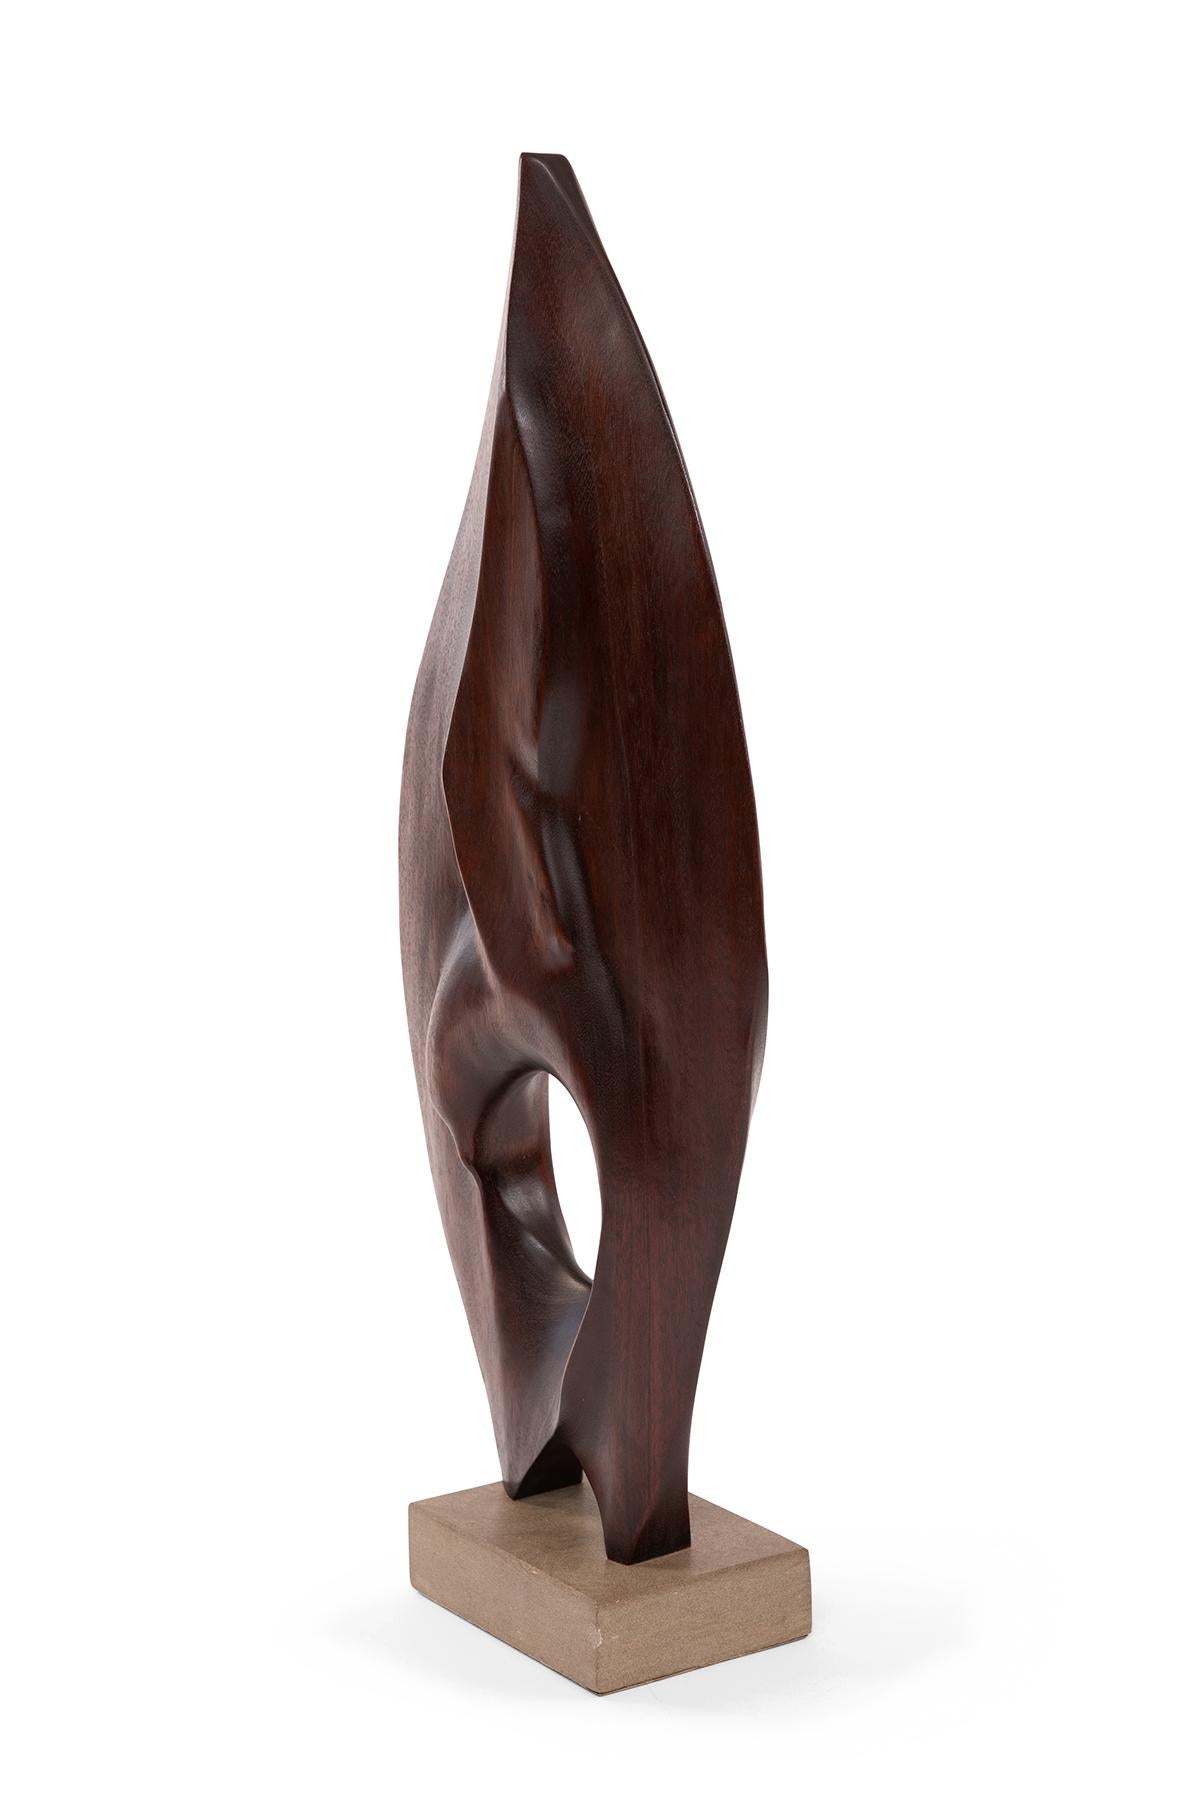 Solid walnut sculptural form by artist Gert Olsen on stone base. Signed and dated.